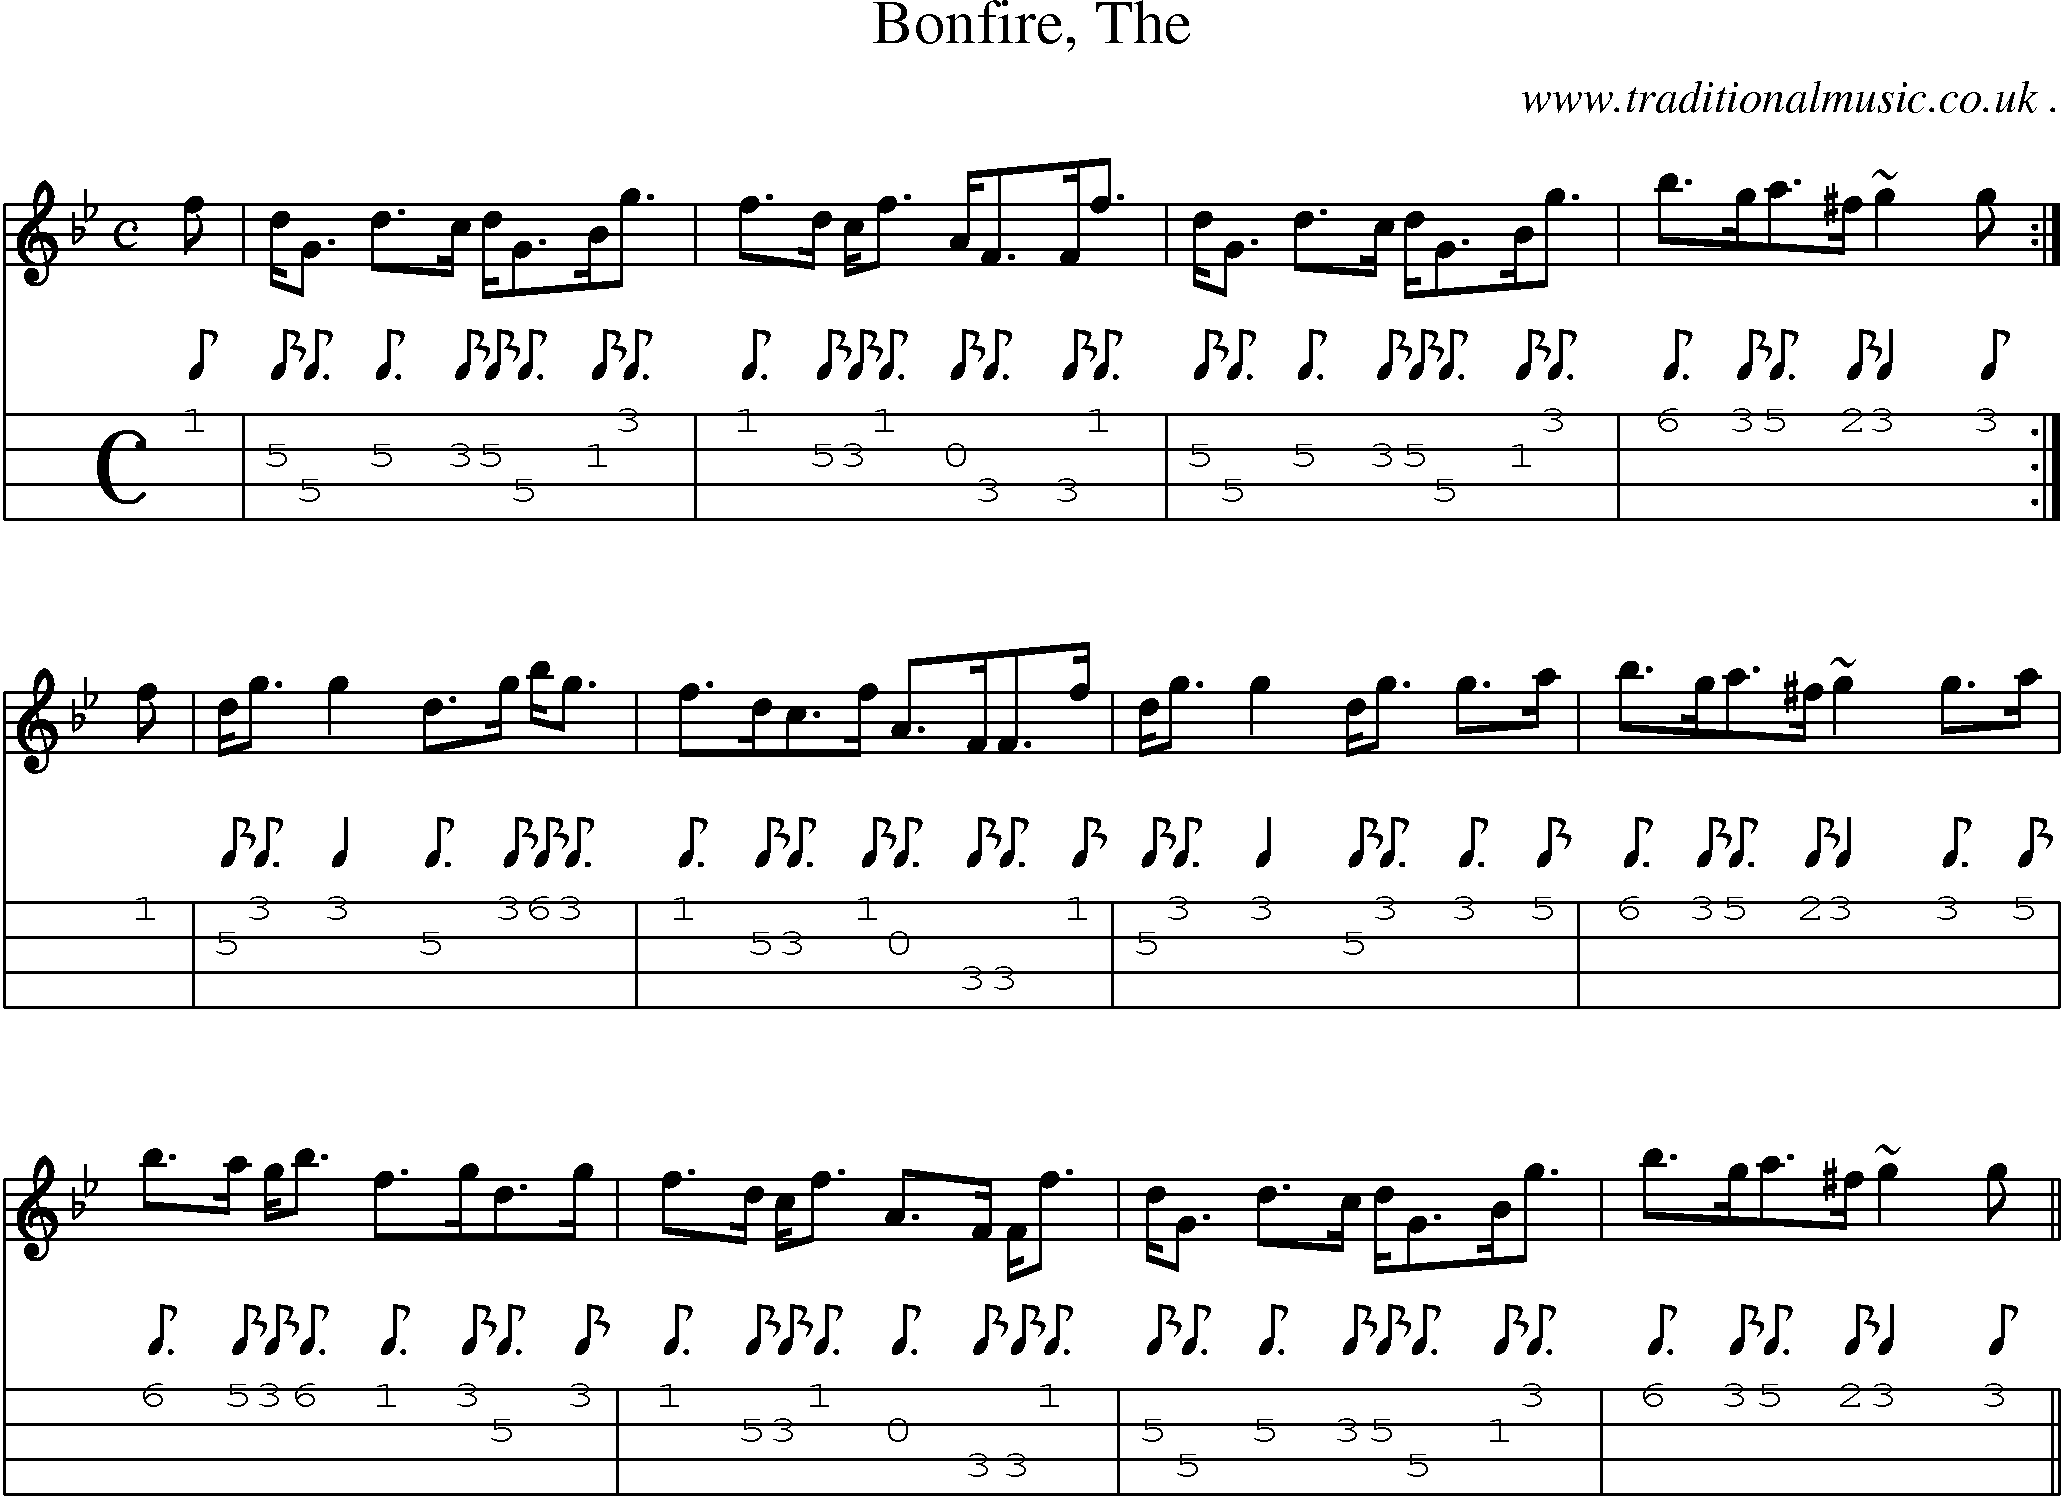 Sheet-music  score, Chords and Mandolin Tabs for Bonfire The